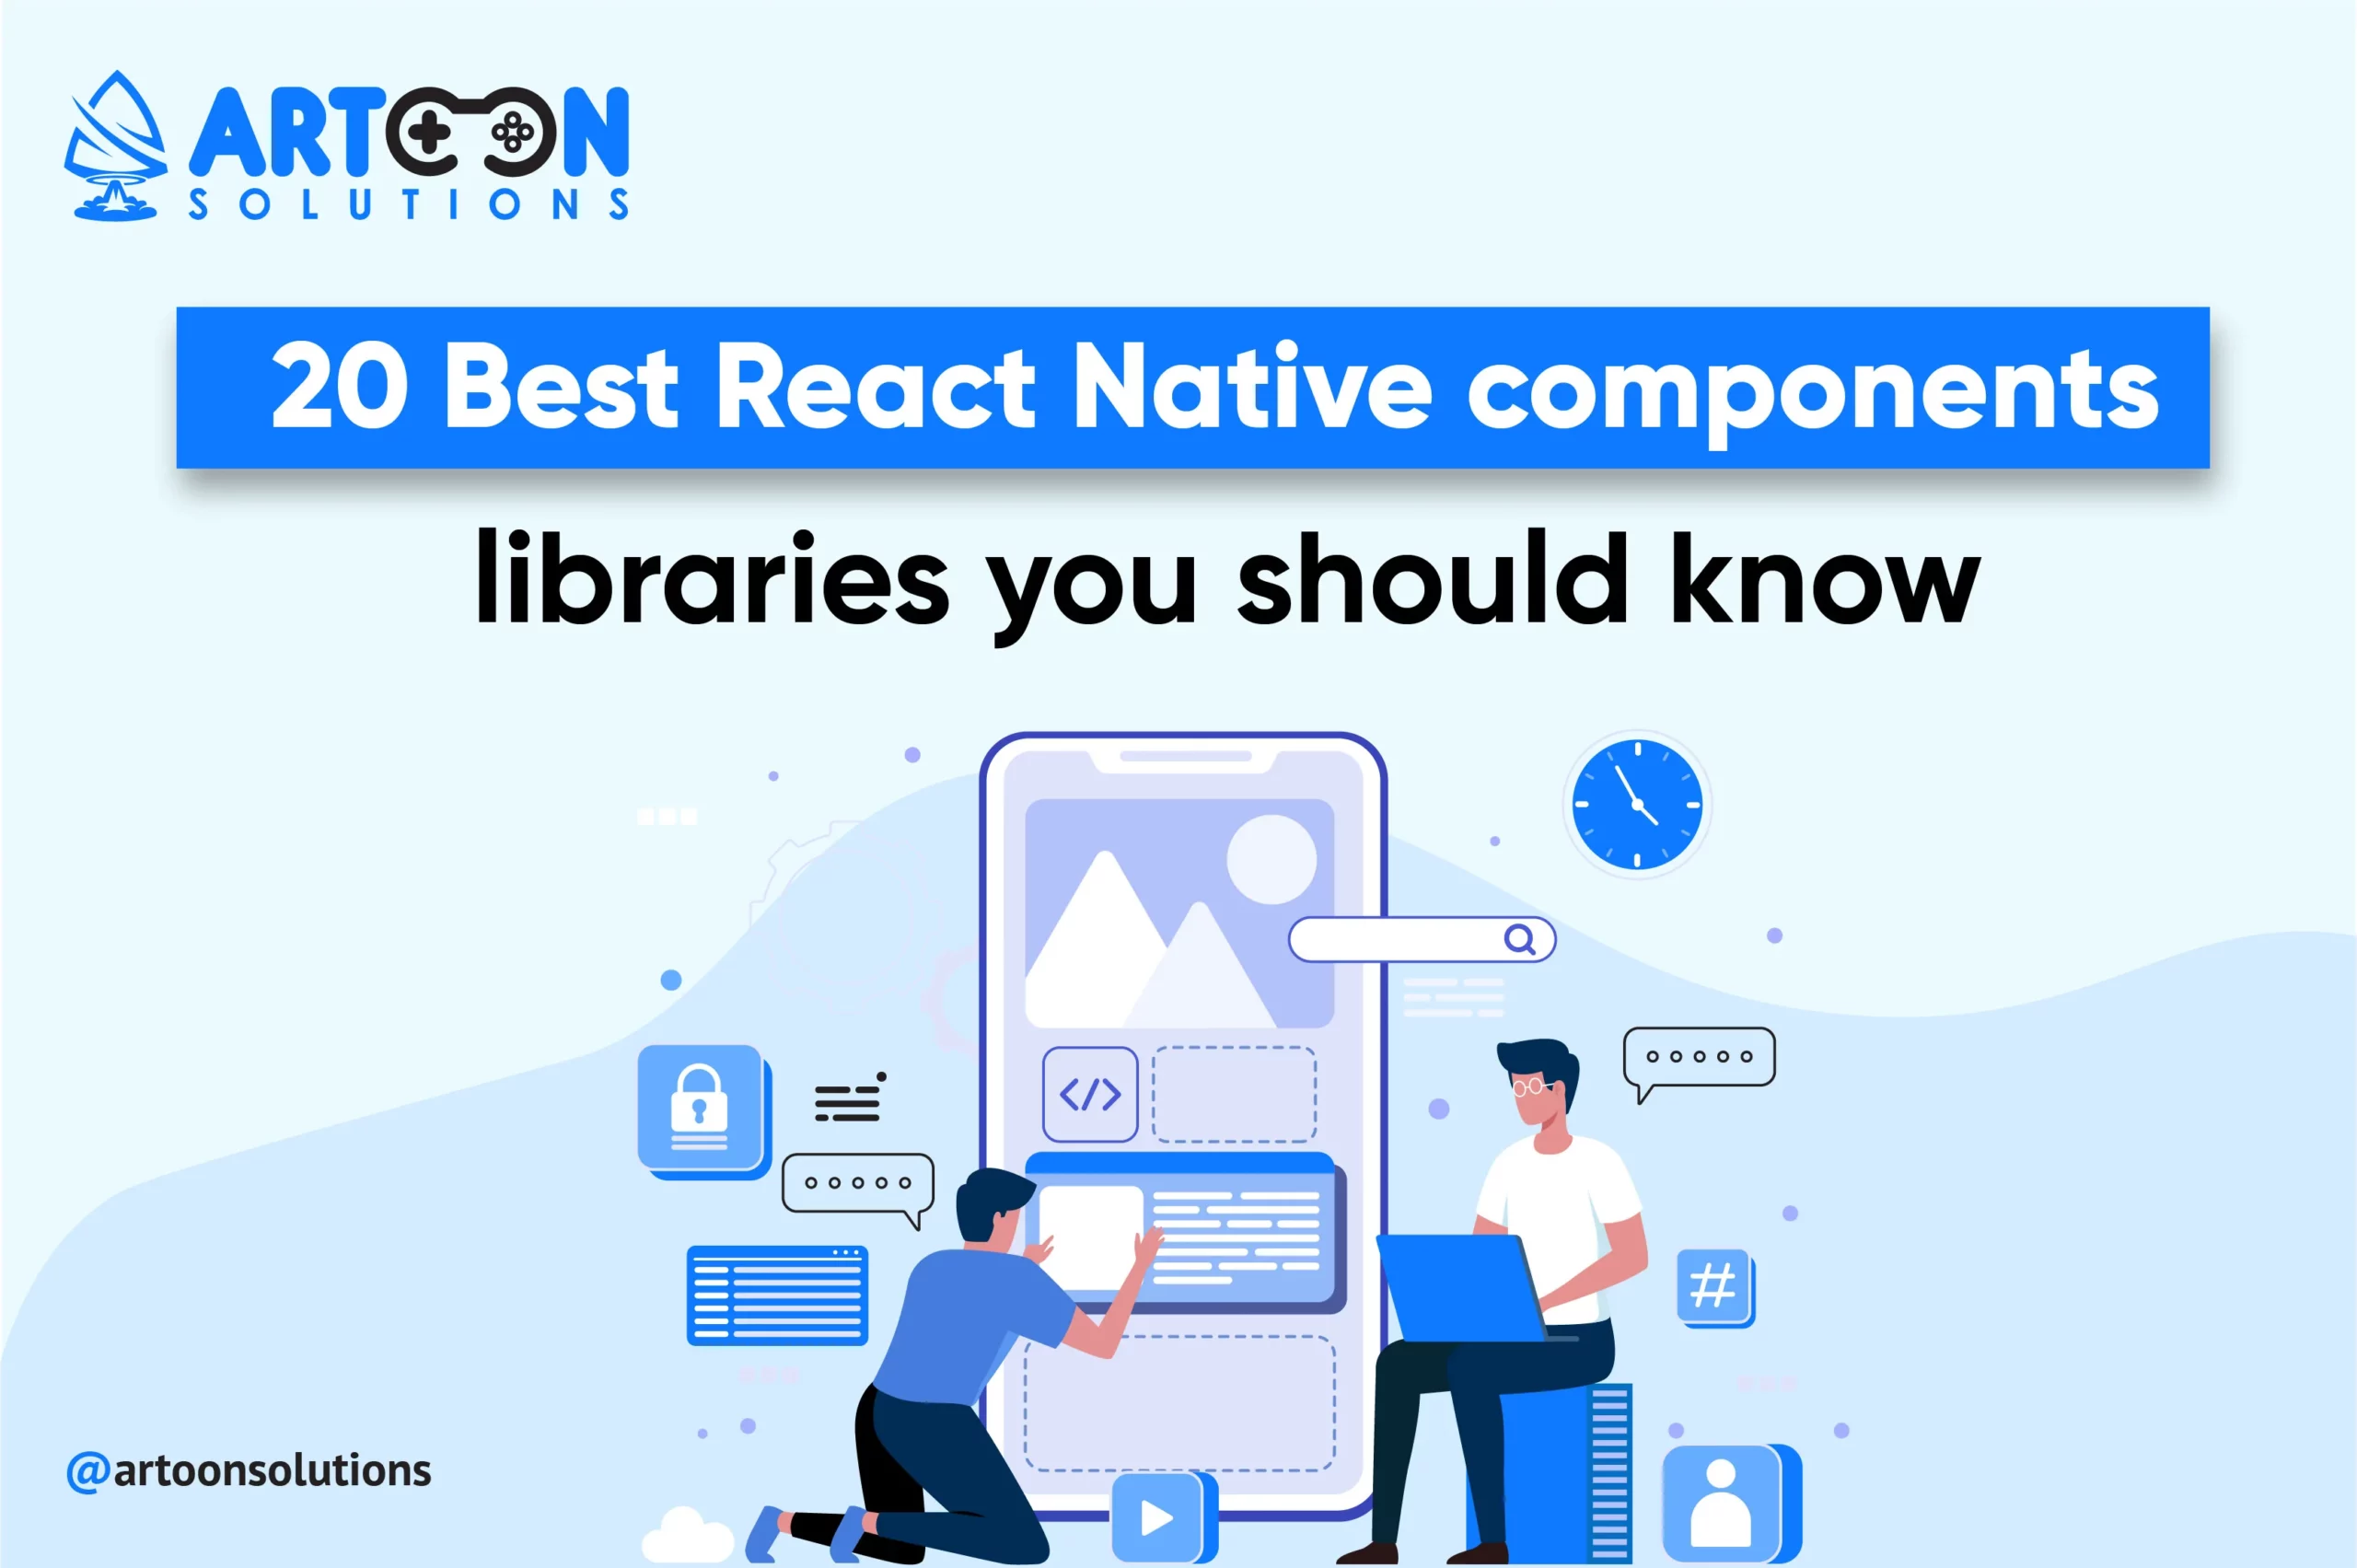 20 Best react native components libraries you should know